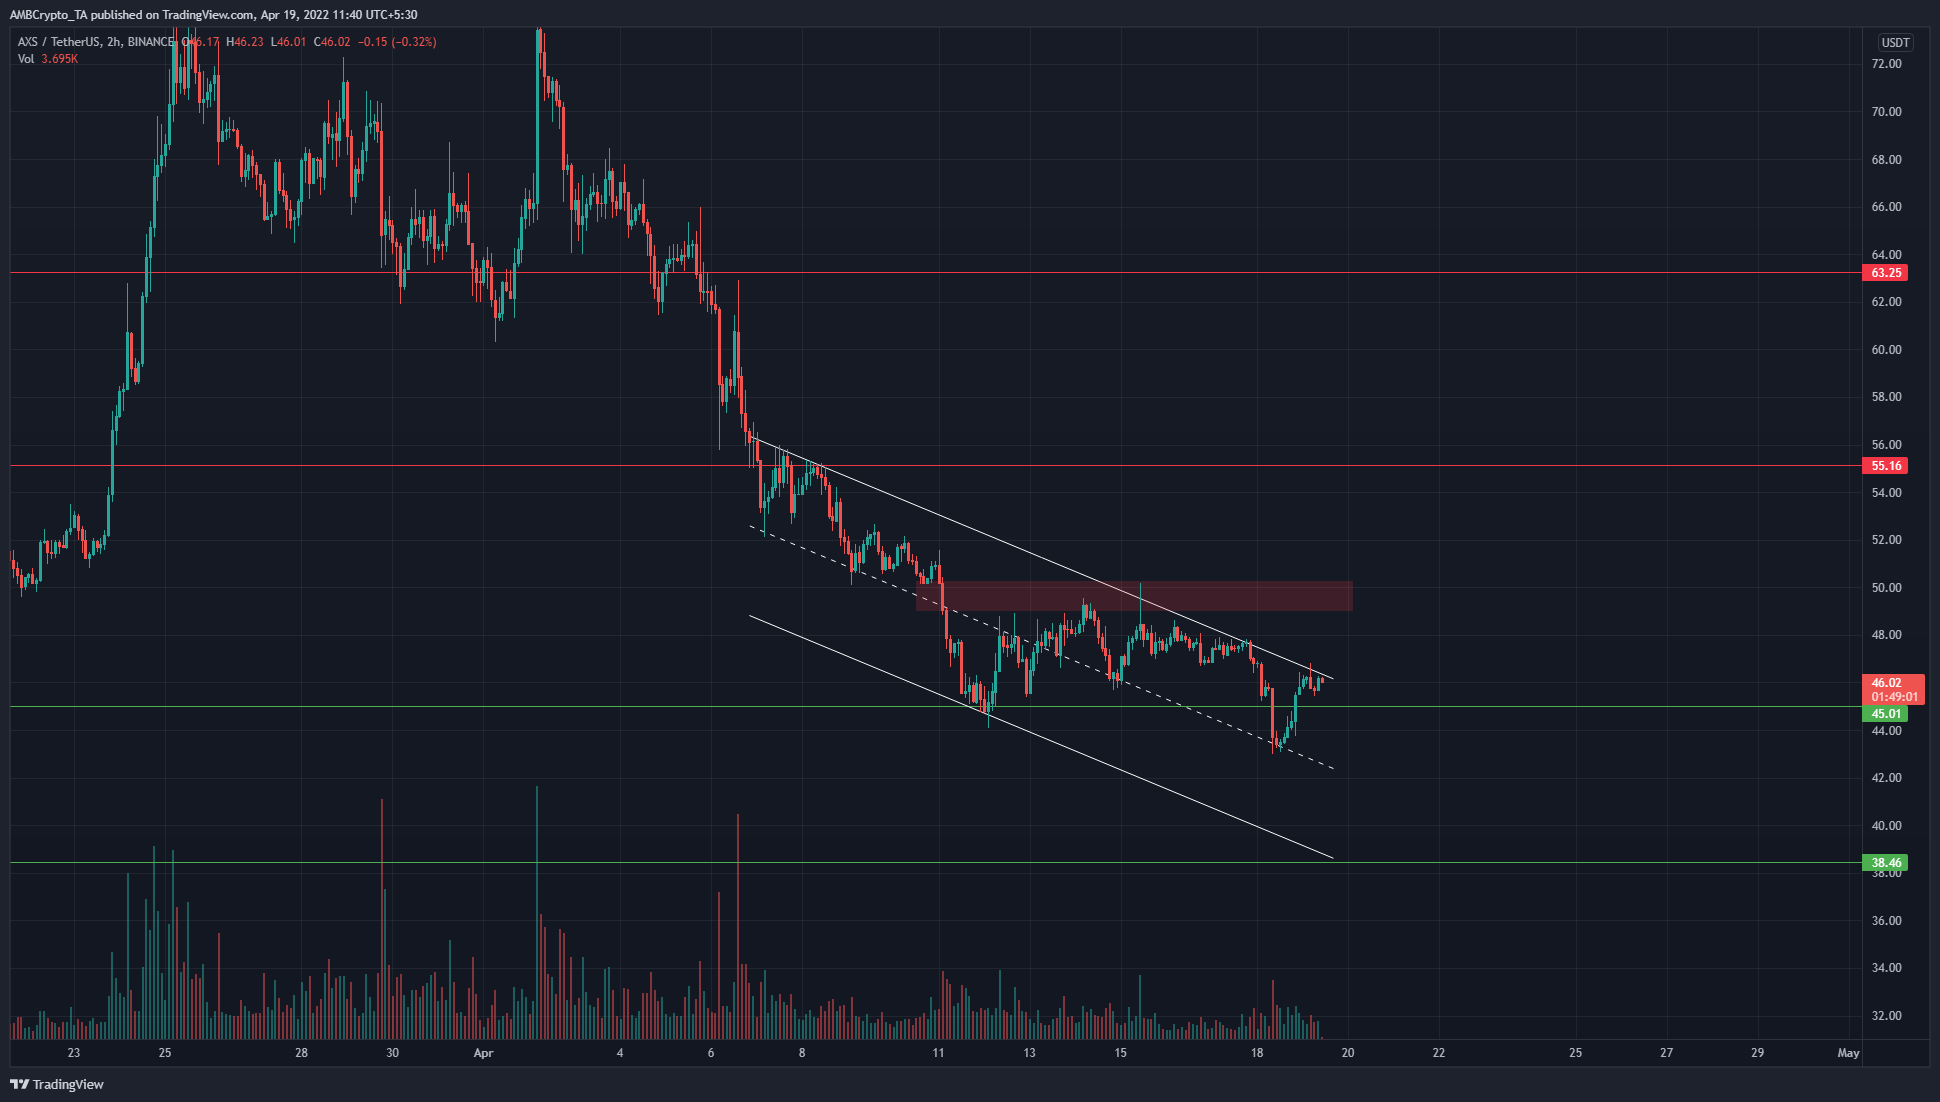 Axie Infinity faces tough resistance all the way to $50, but the bulls have some fight left in them